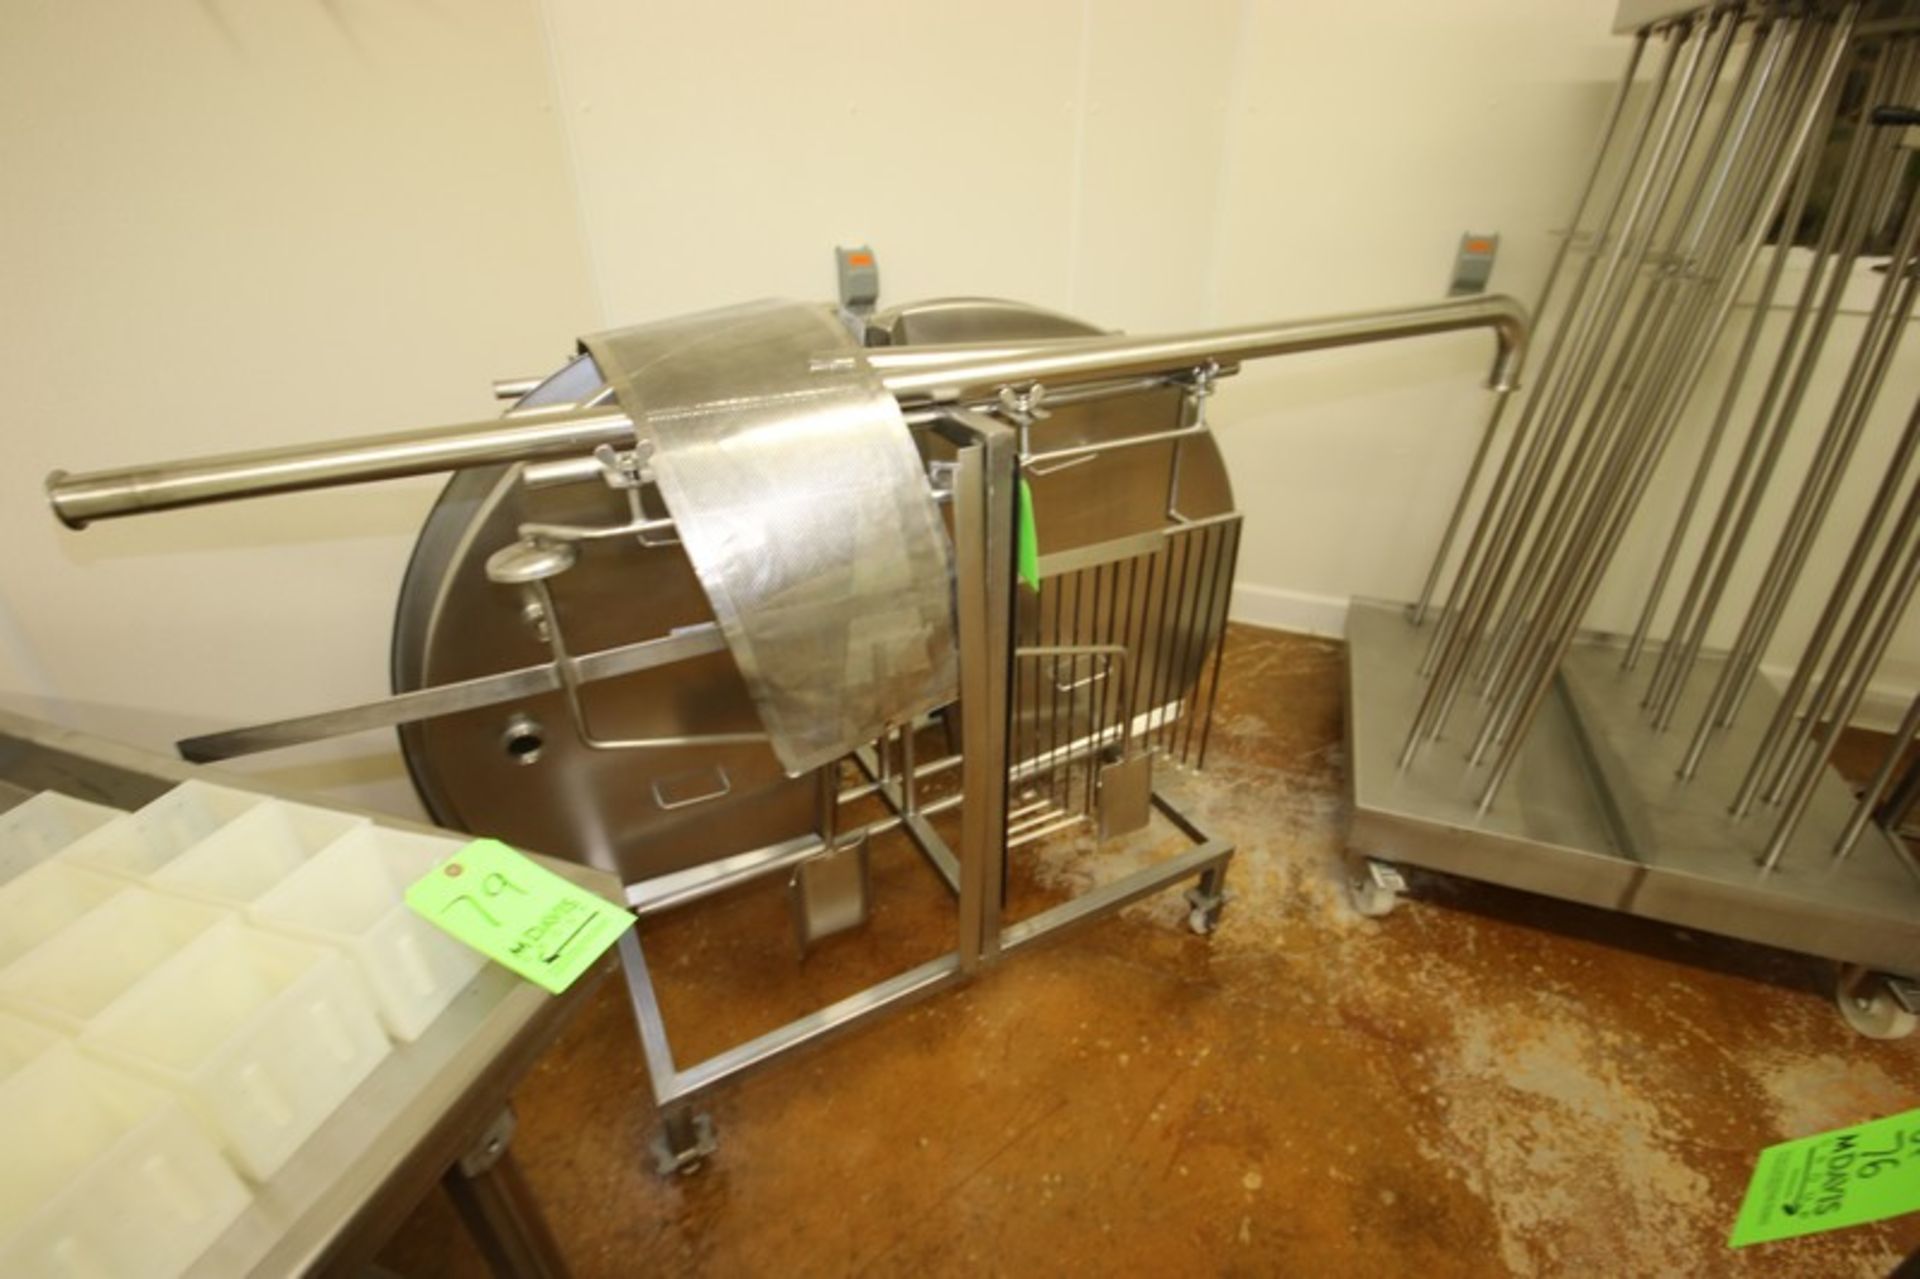 CVR 290 Gal. Double OO Cheesevat, S/N 0708019706, Includes Pump, Overall Dims.: Aprox. 8' L x 53" - Image 10 of 13